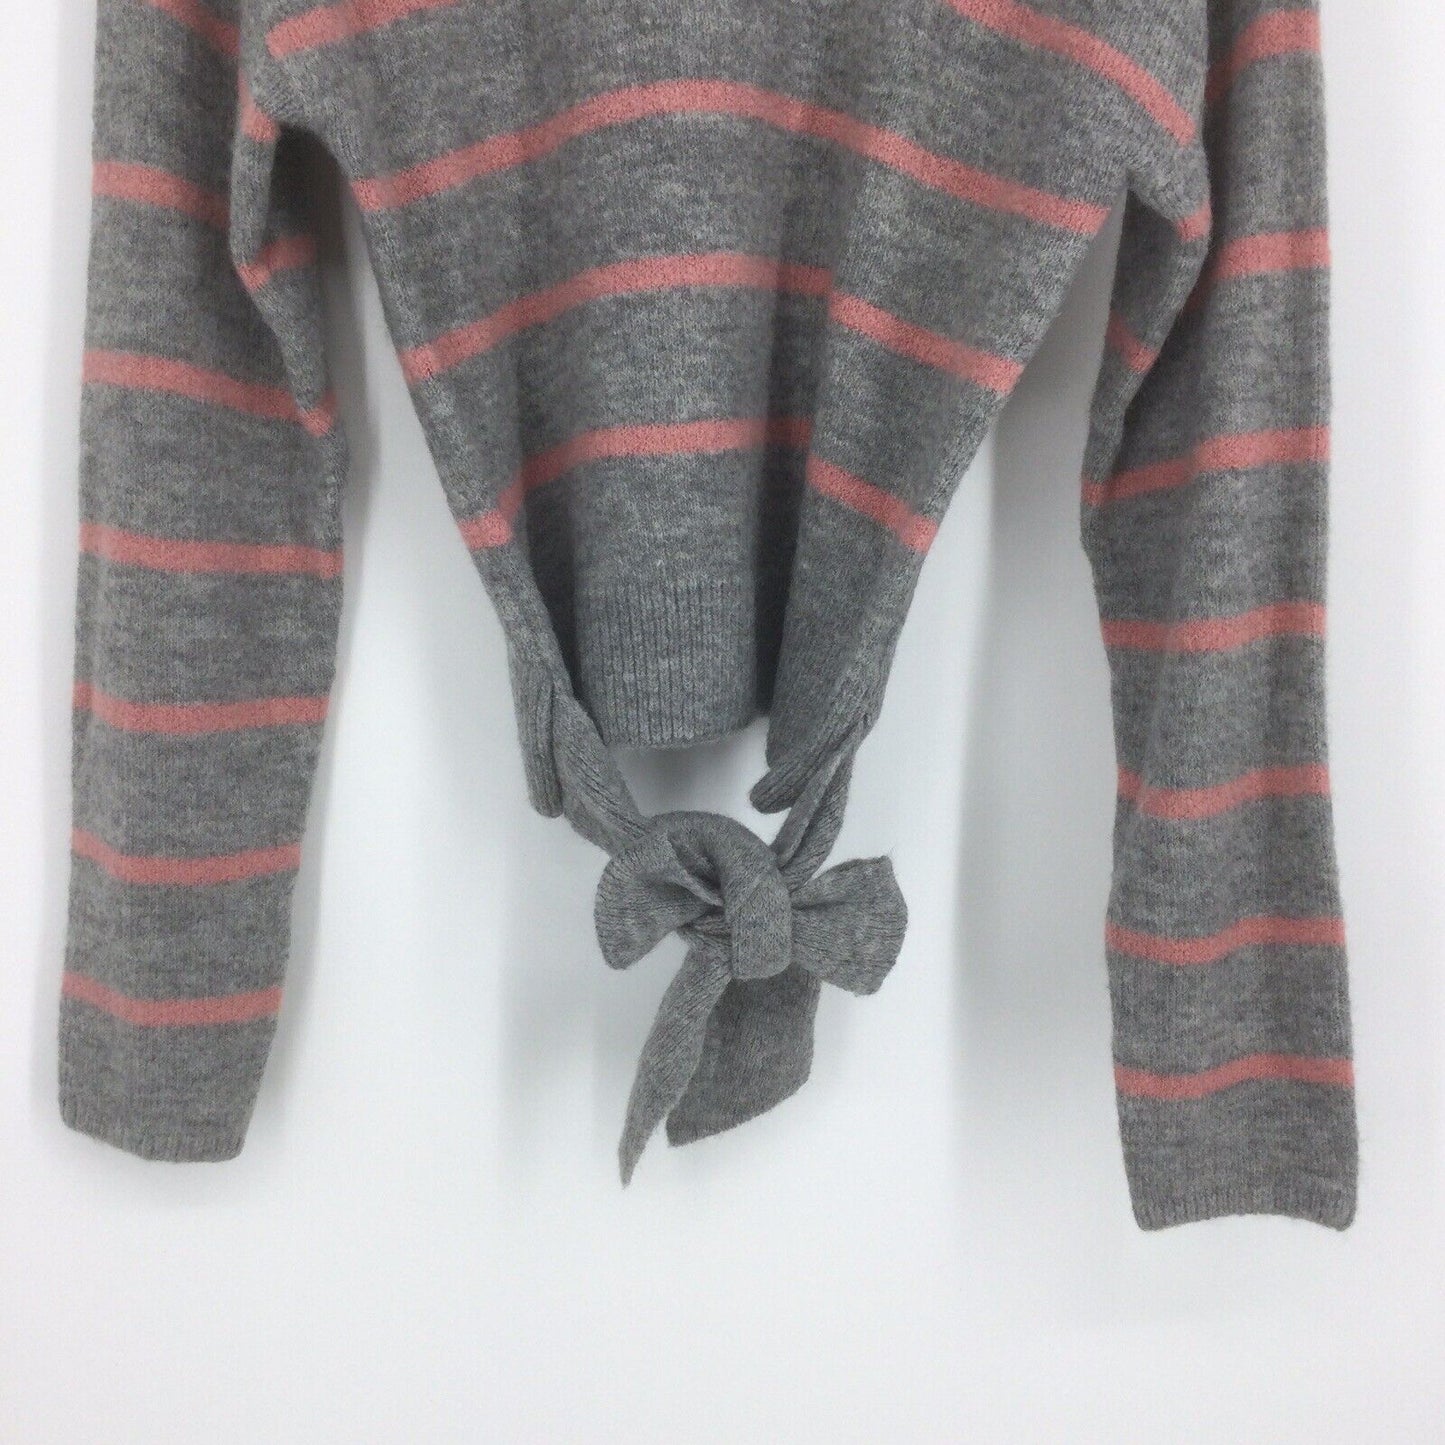 Knitted sweater with a distinctive addition from WAYF